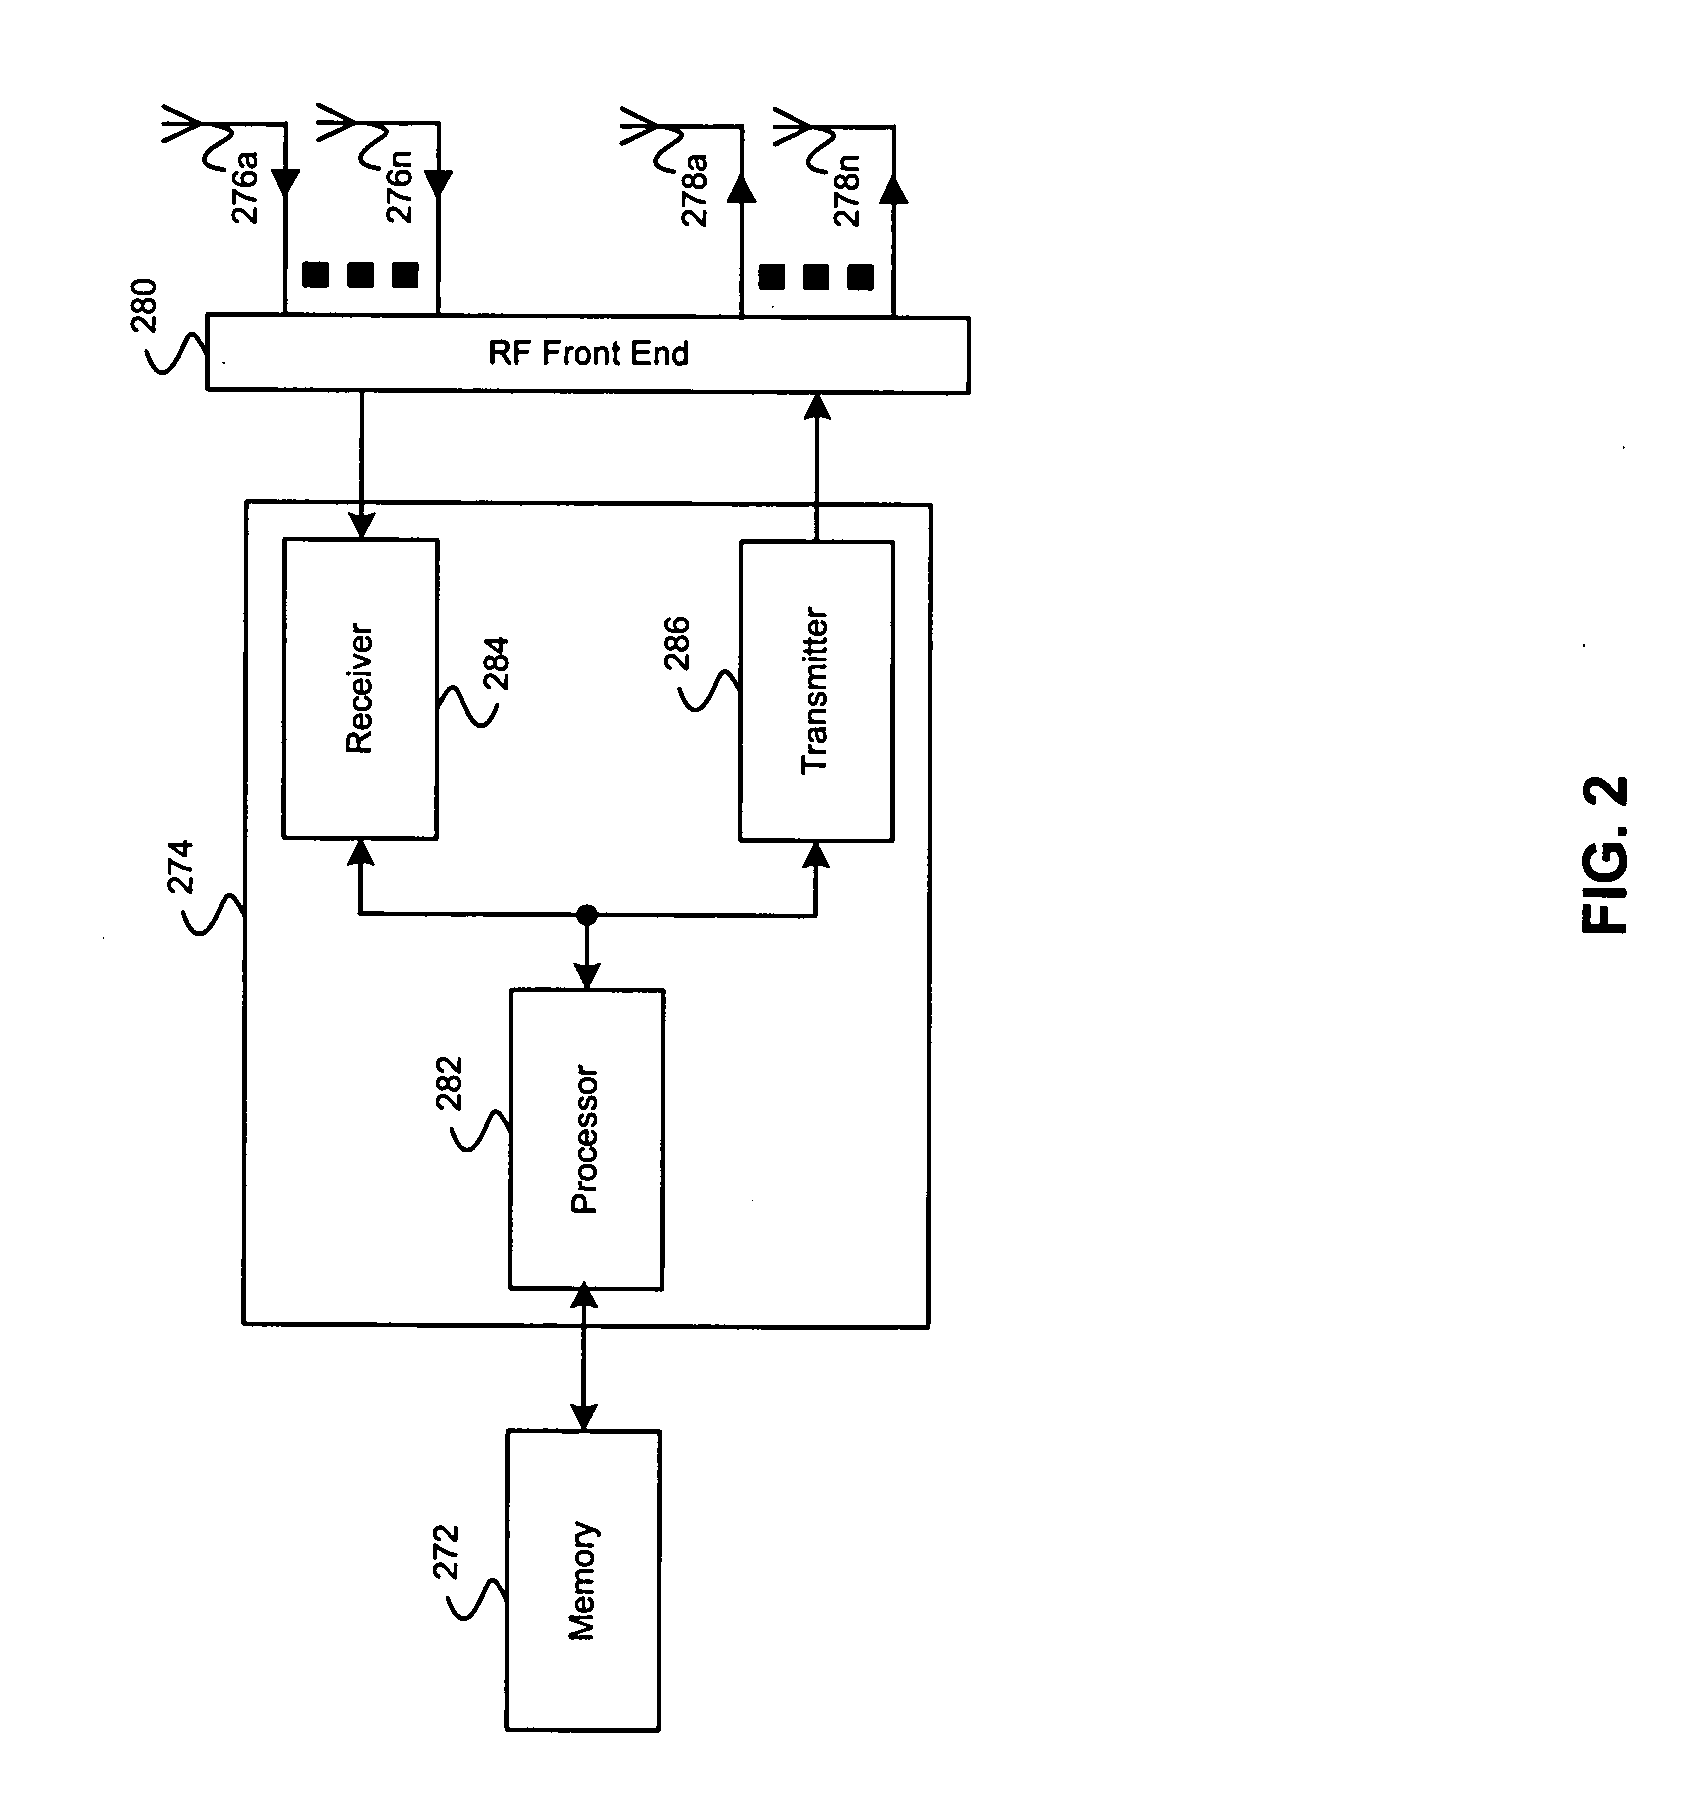 Method and system for transmitter beamforming for reduced complexity multiple input multiple output (MIMO) transceivers